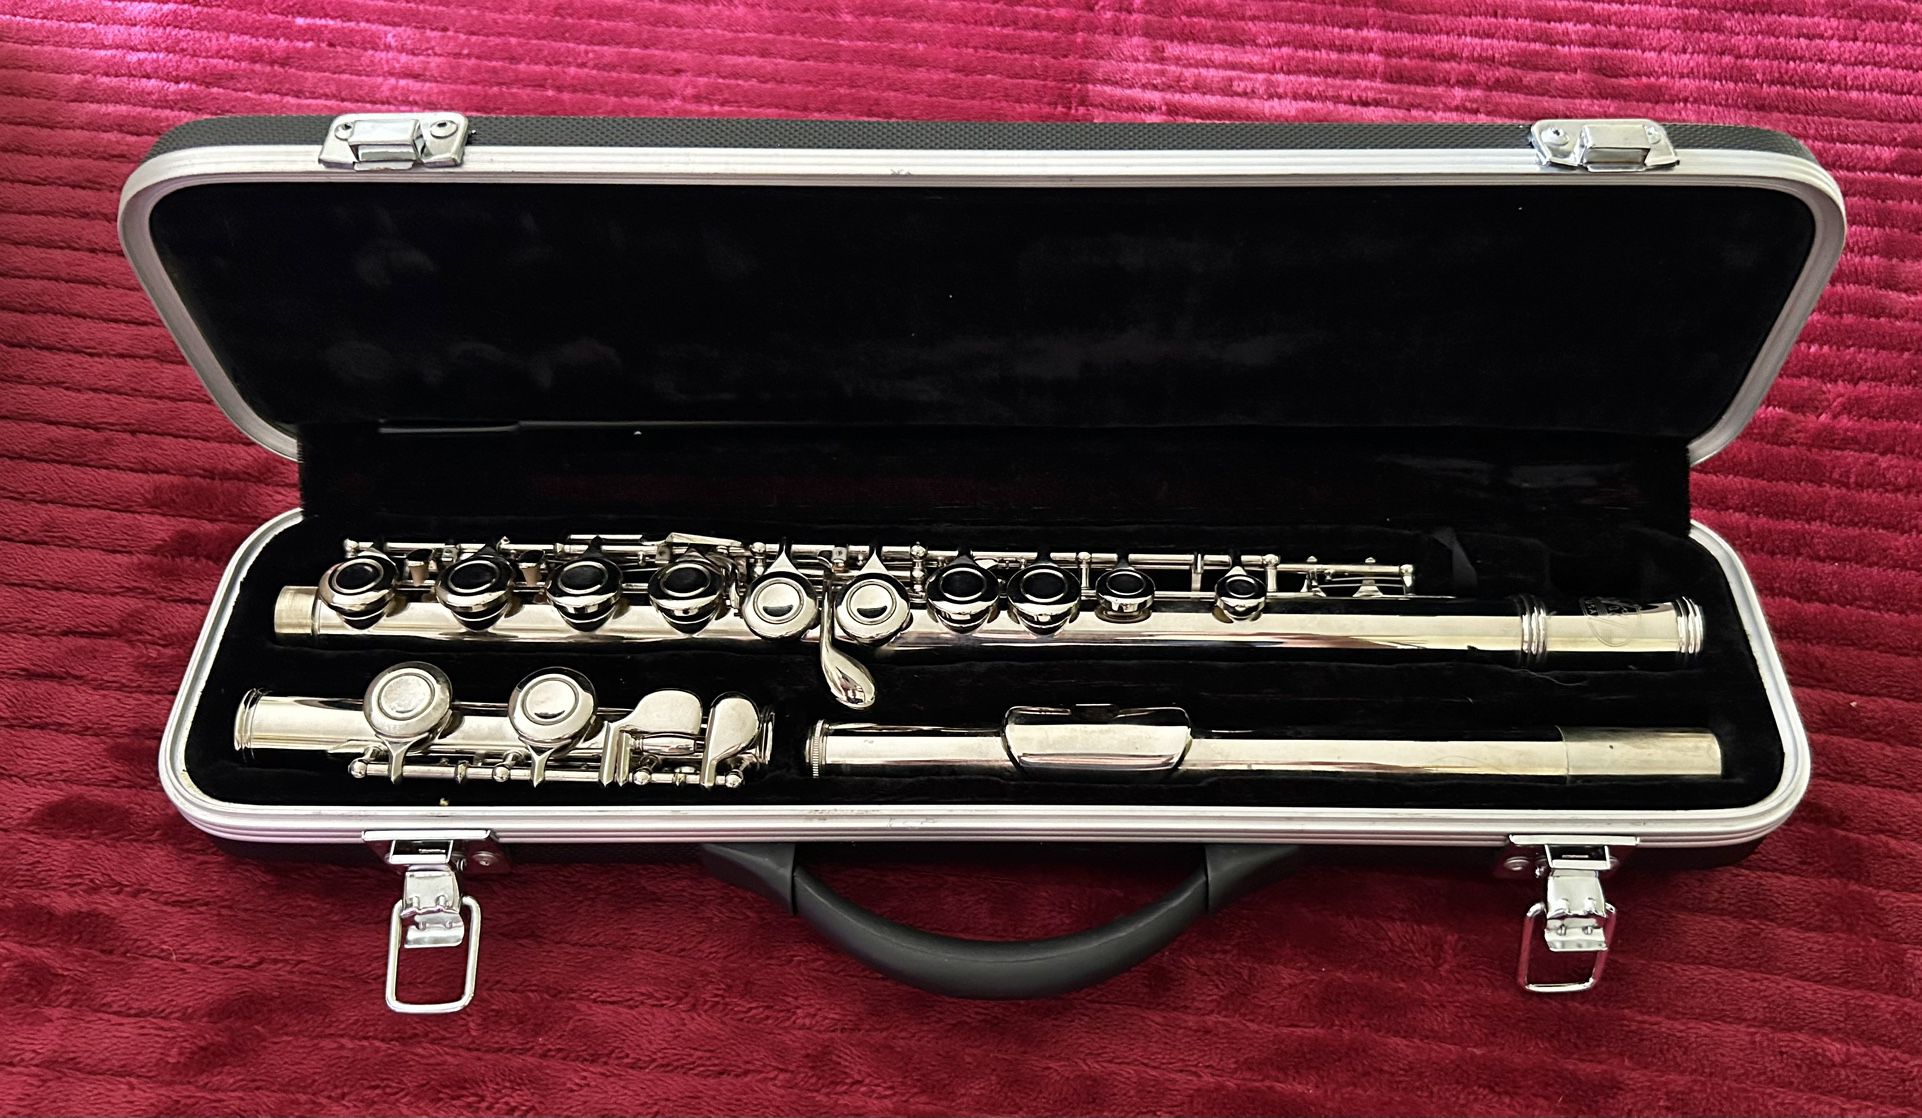 Flute with carry case in excellent condition. $65